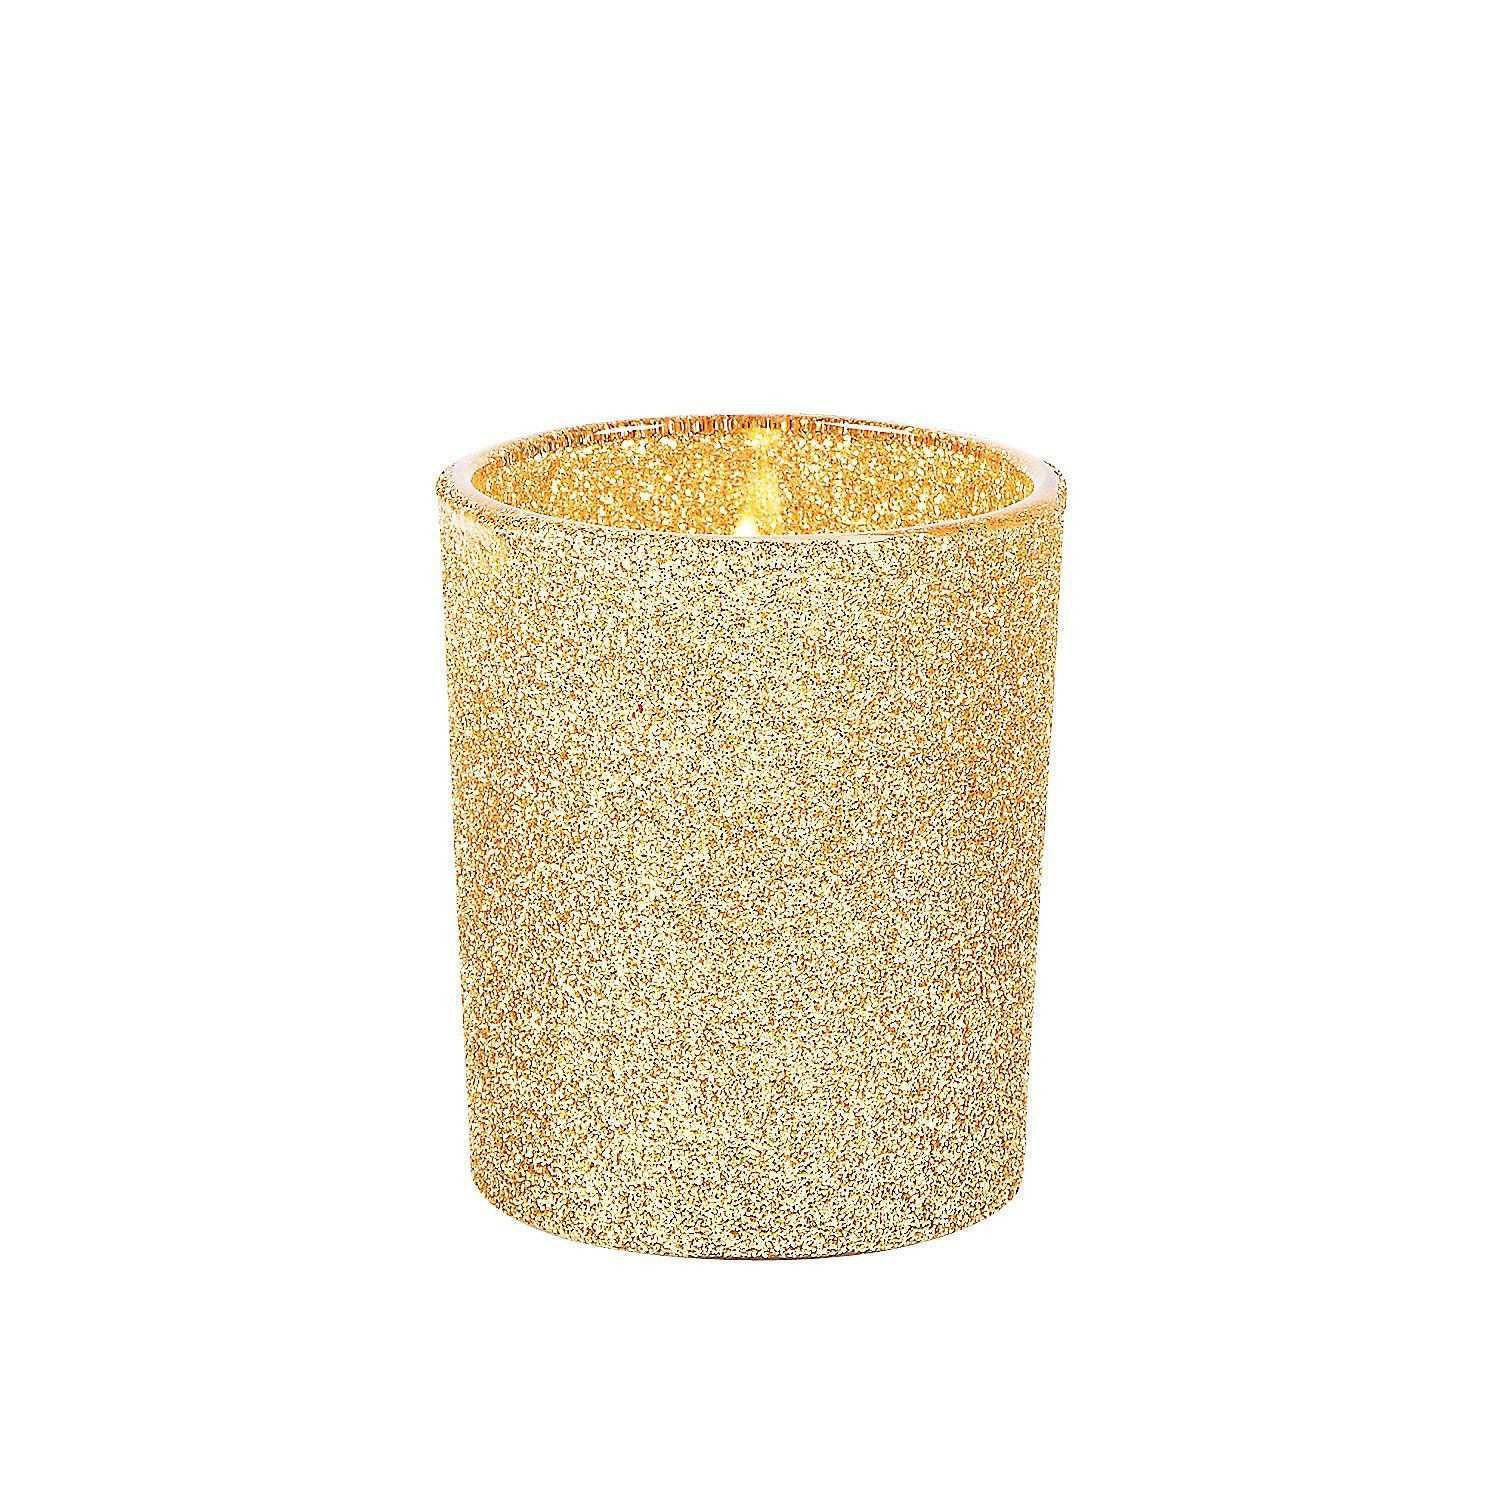 glitter vases for sale of gold mercury glass vases awesome inspiration gold votive candles pertaining to gold mercury glass vases awesome inspiration gold votive candles with gold glitter votive holders